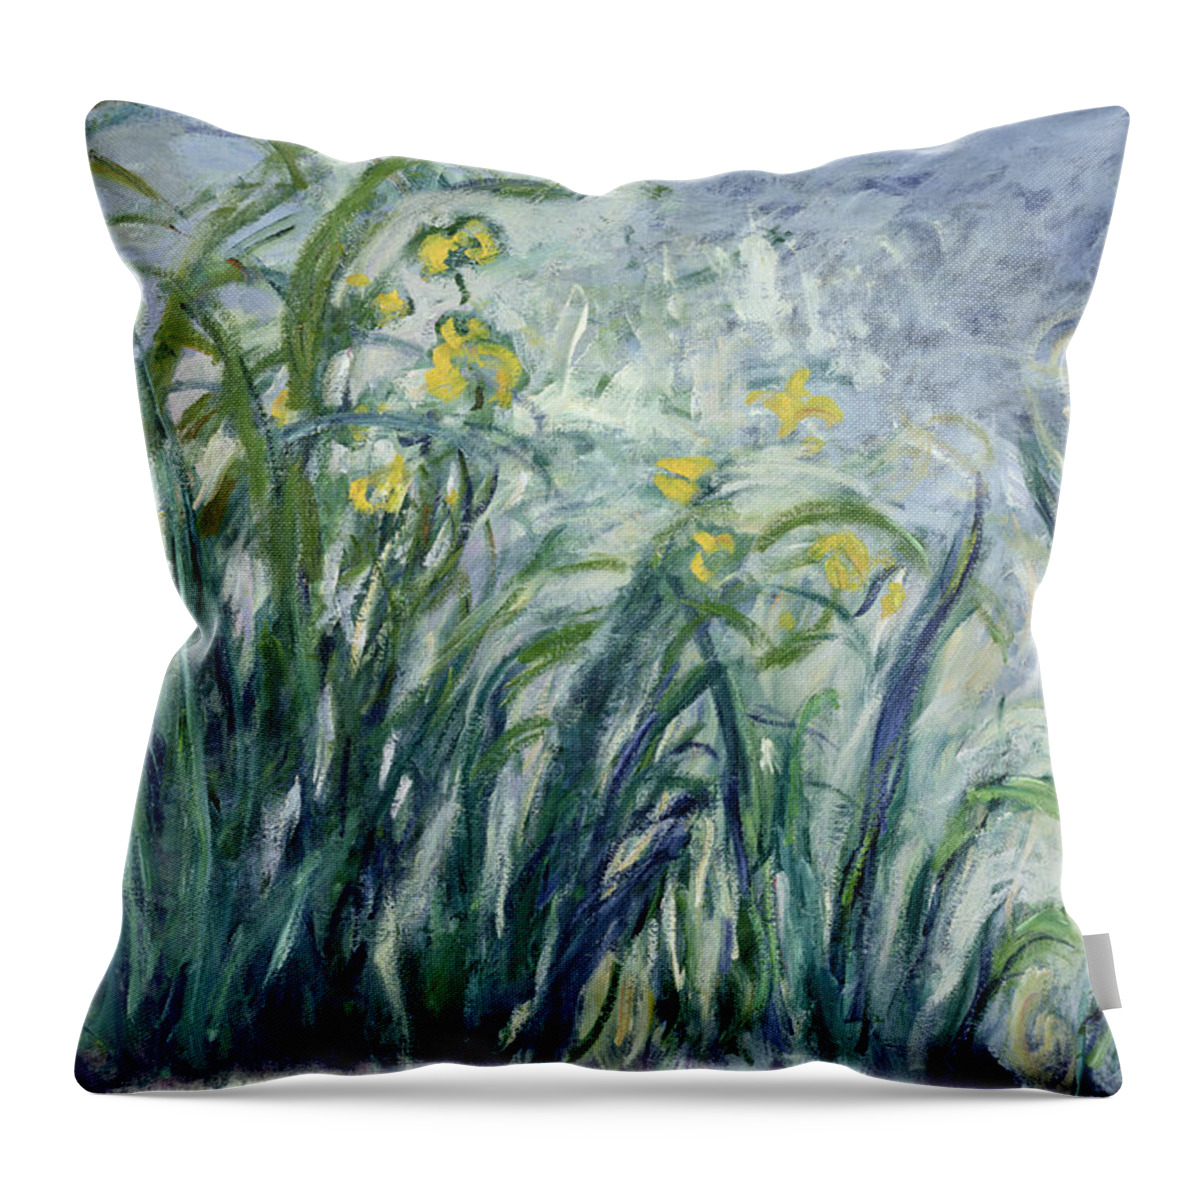 Iris Throw Pillow featuring the painting Yellow And Purple Irises, 1924-25 by Claude Monet